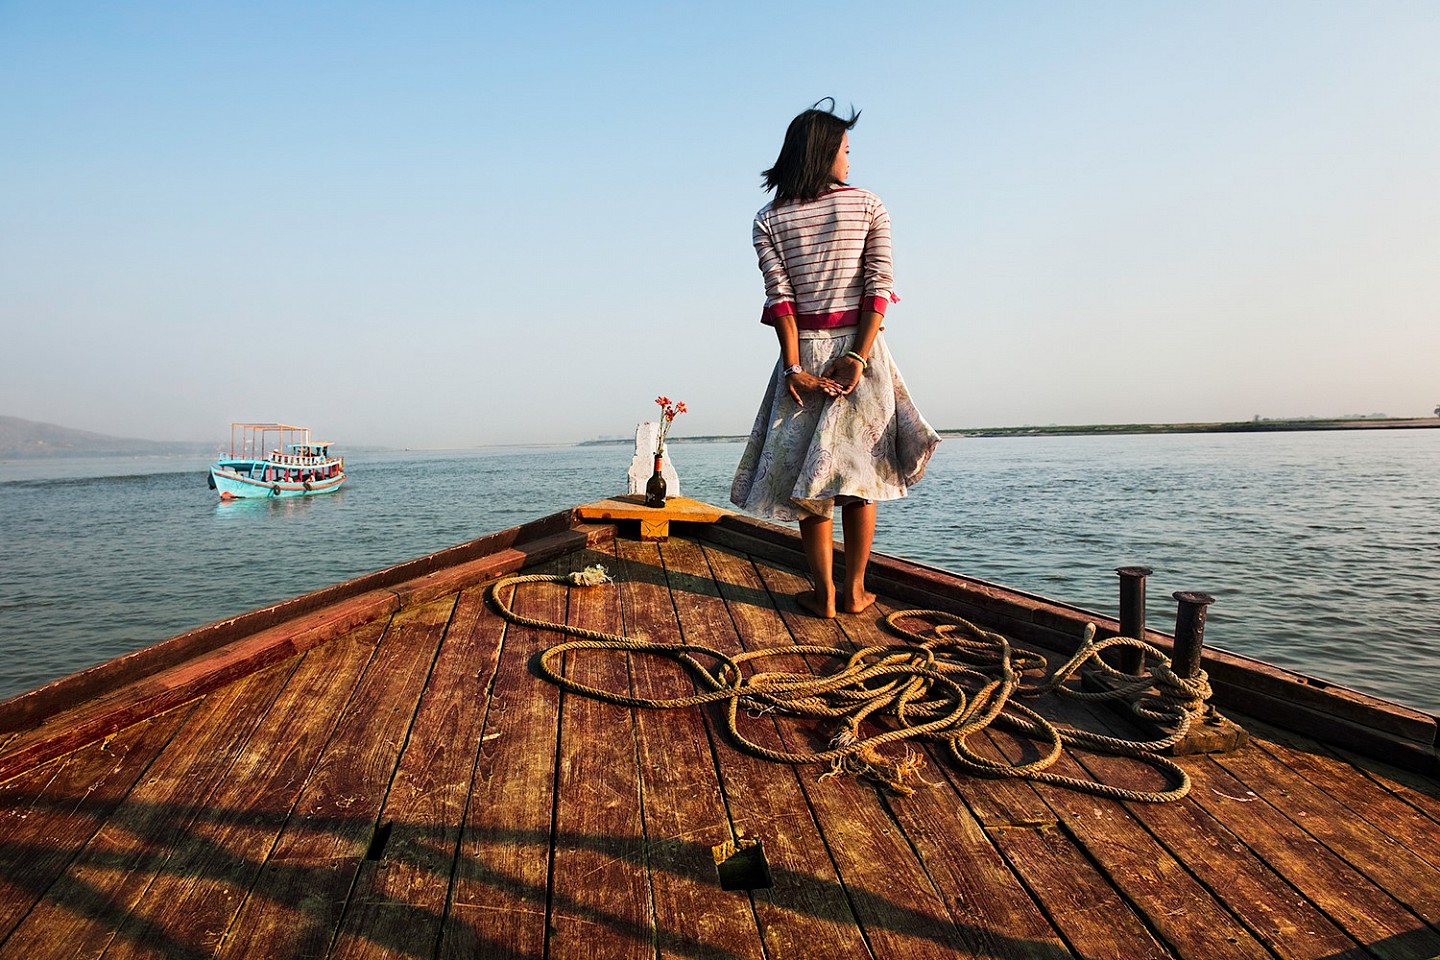 Steve McCurry, Girl on Ship Prow, 2011
FujiFlex Crystal Archive Print, (Inquire for available sizes)
BURMA-10314